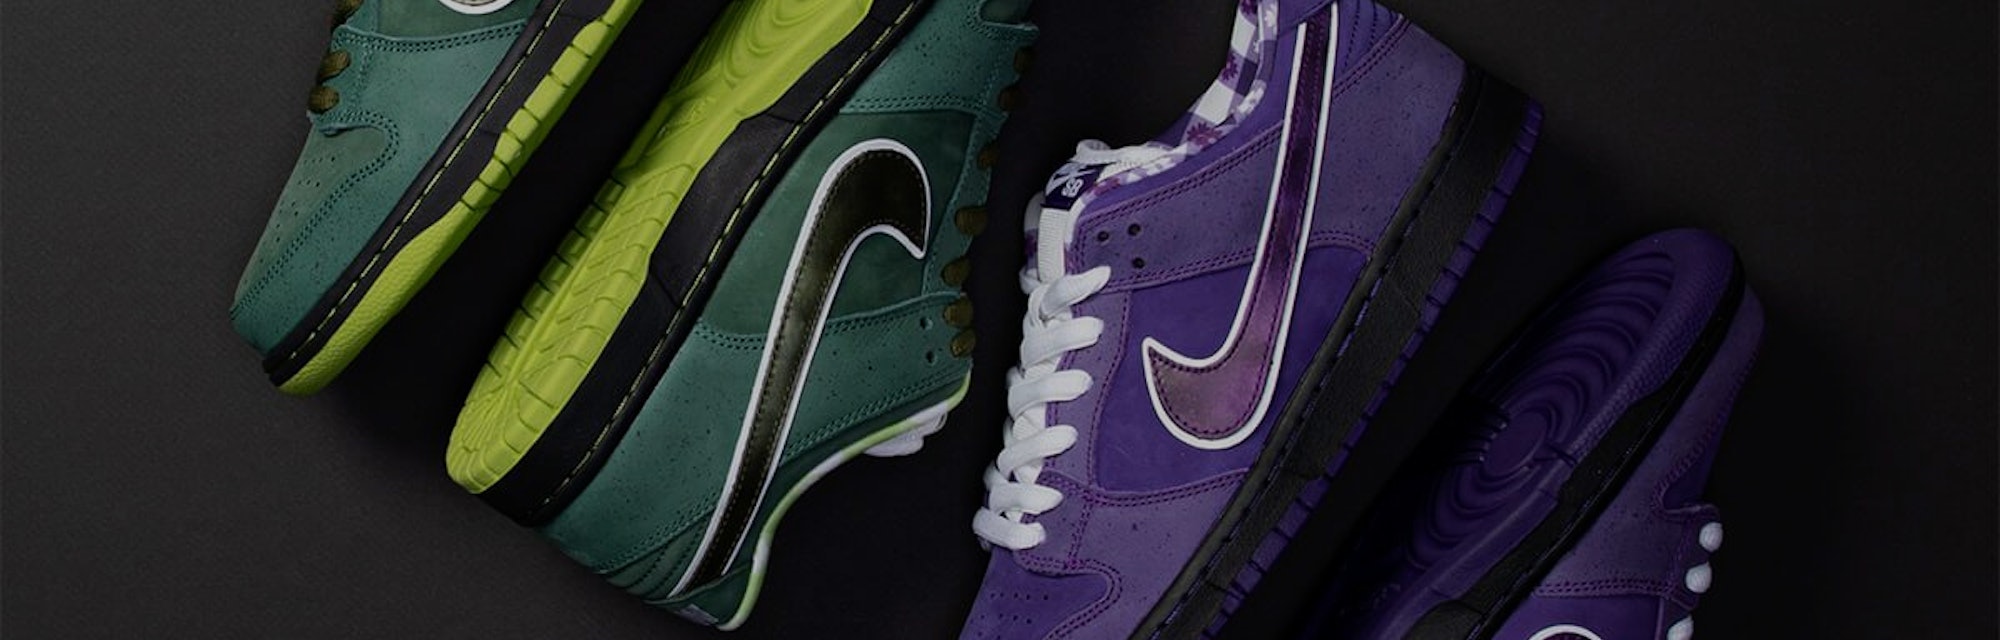 The green and purple Nike SB Lobster Dunk sneakers.